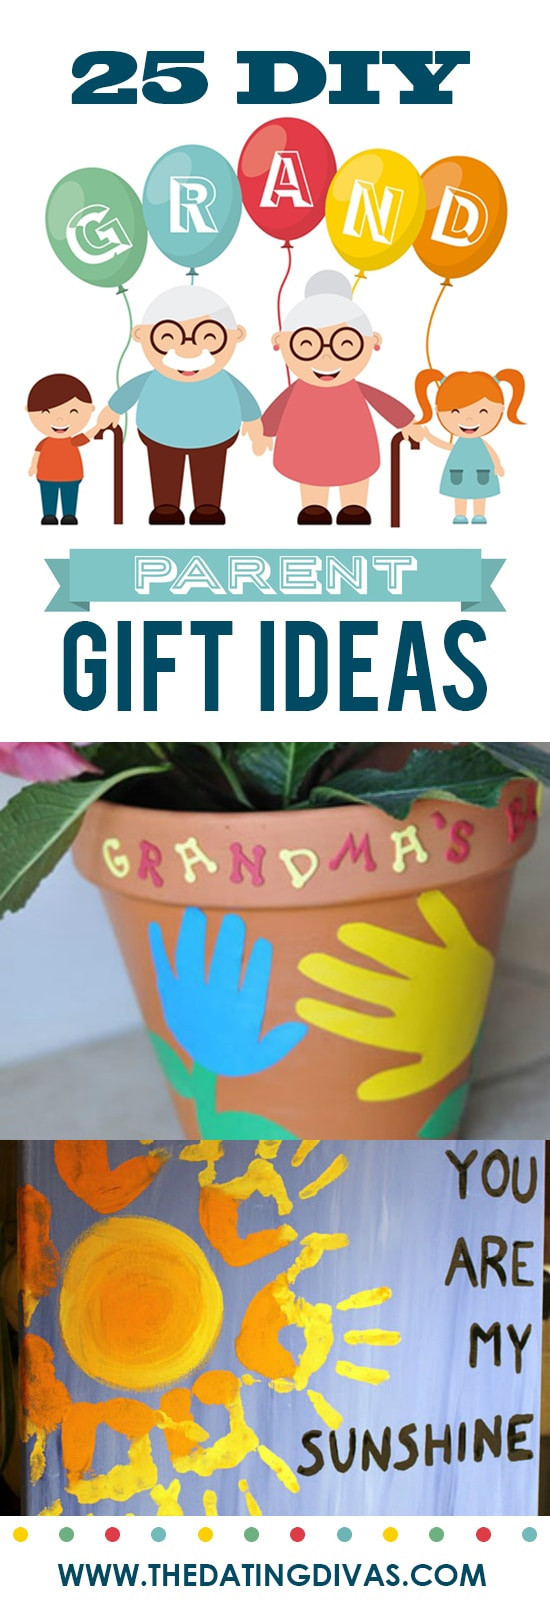 Reddit Mother'S Day Gift Ideas
 30 Ideas for Mother s Day Gift Ideas for Grandma Best